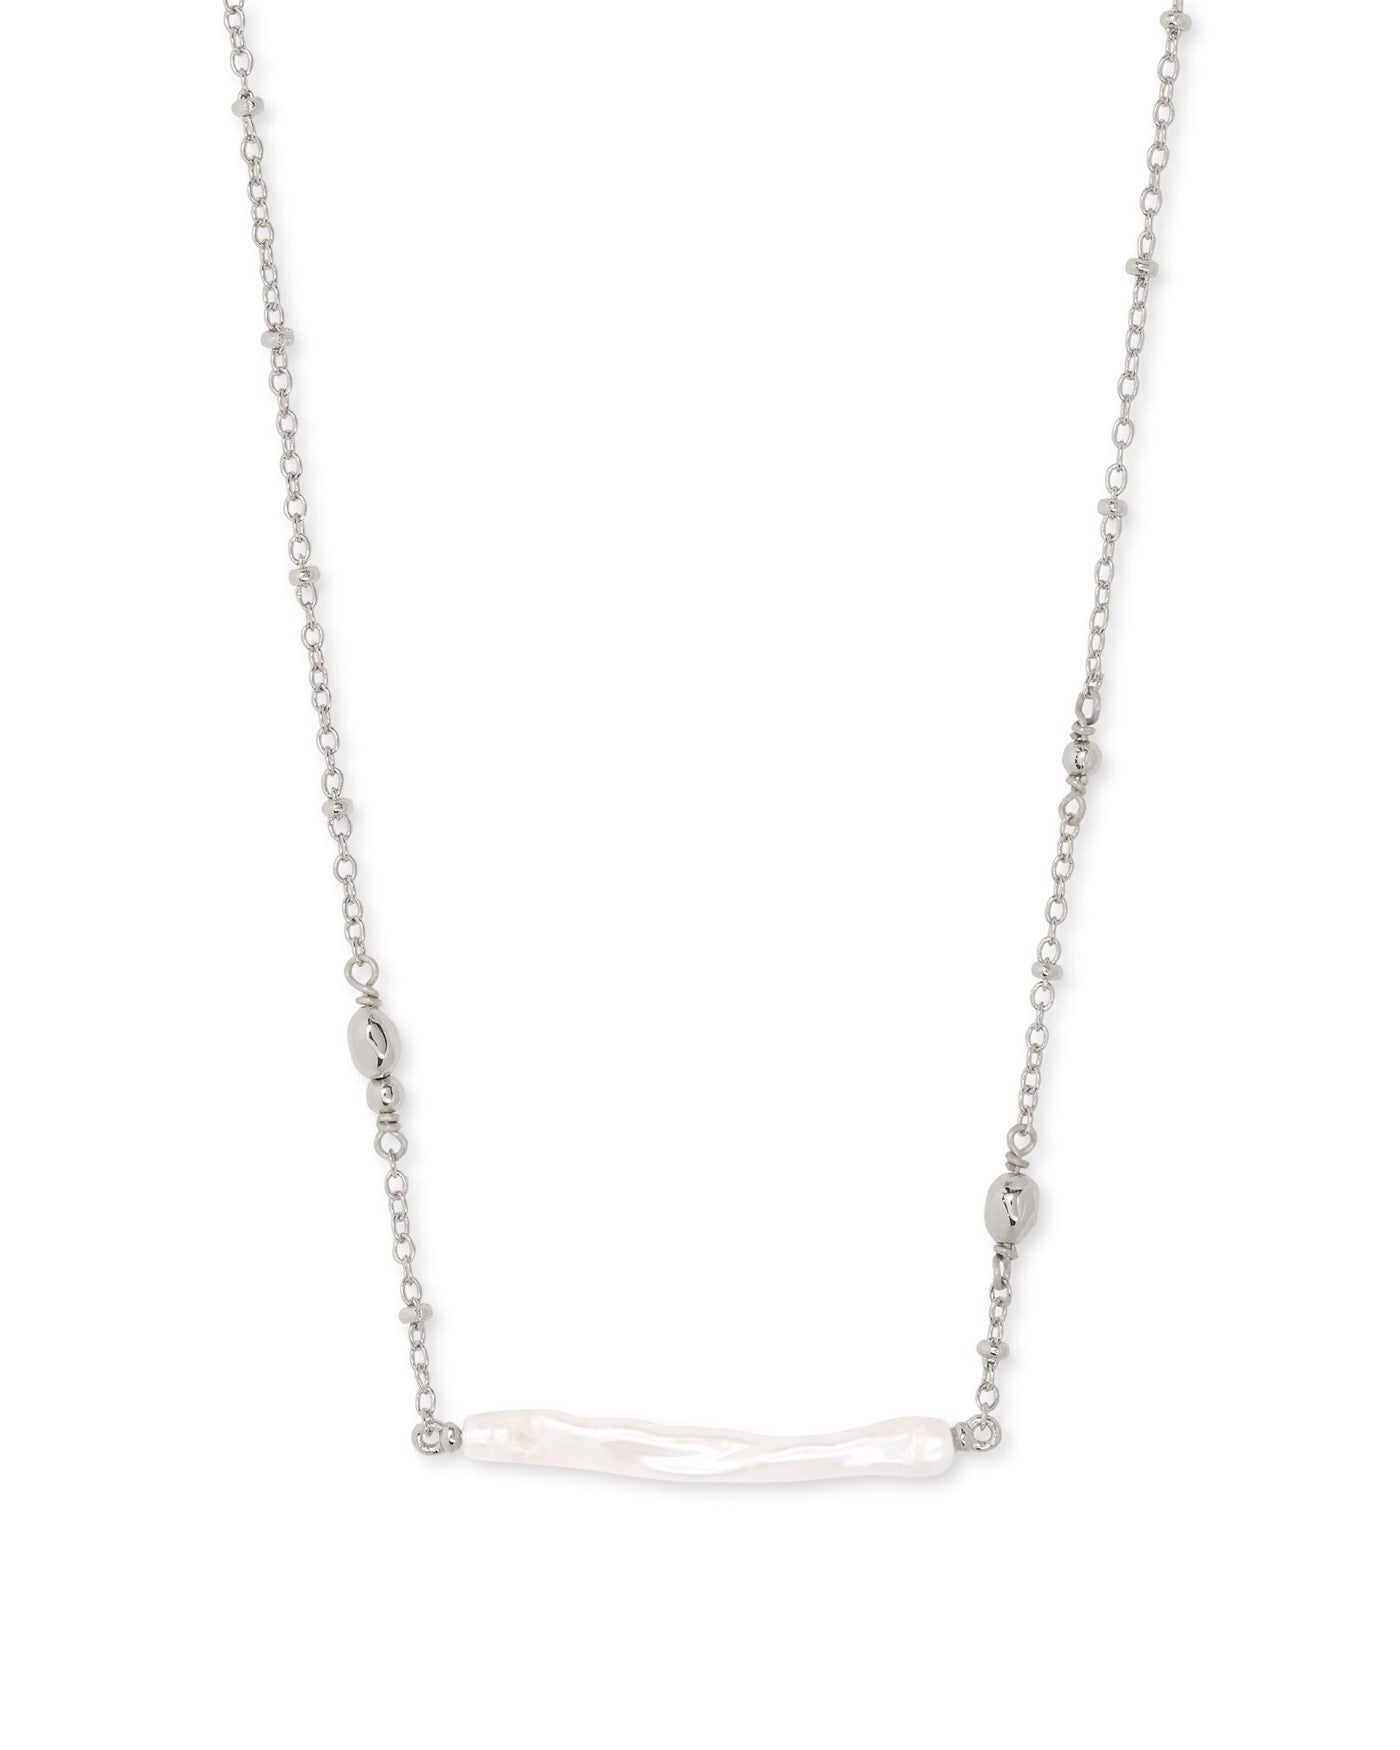 Kendra Scott Eileen Pendant Necklace in Silver on white background close up.